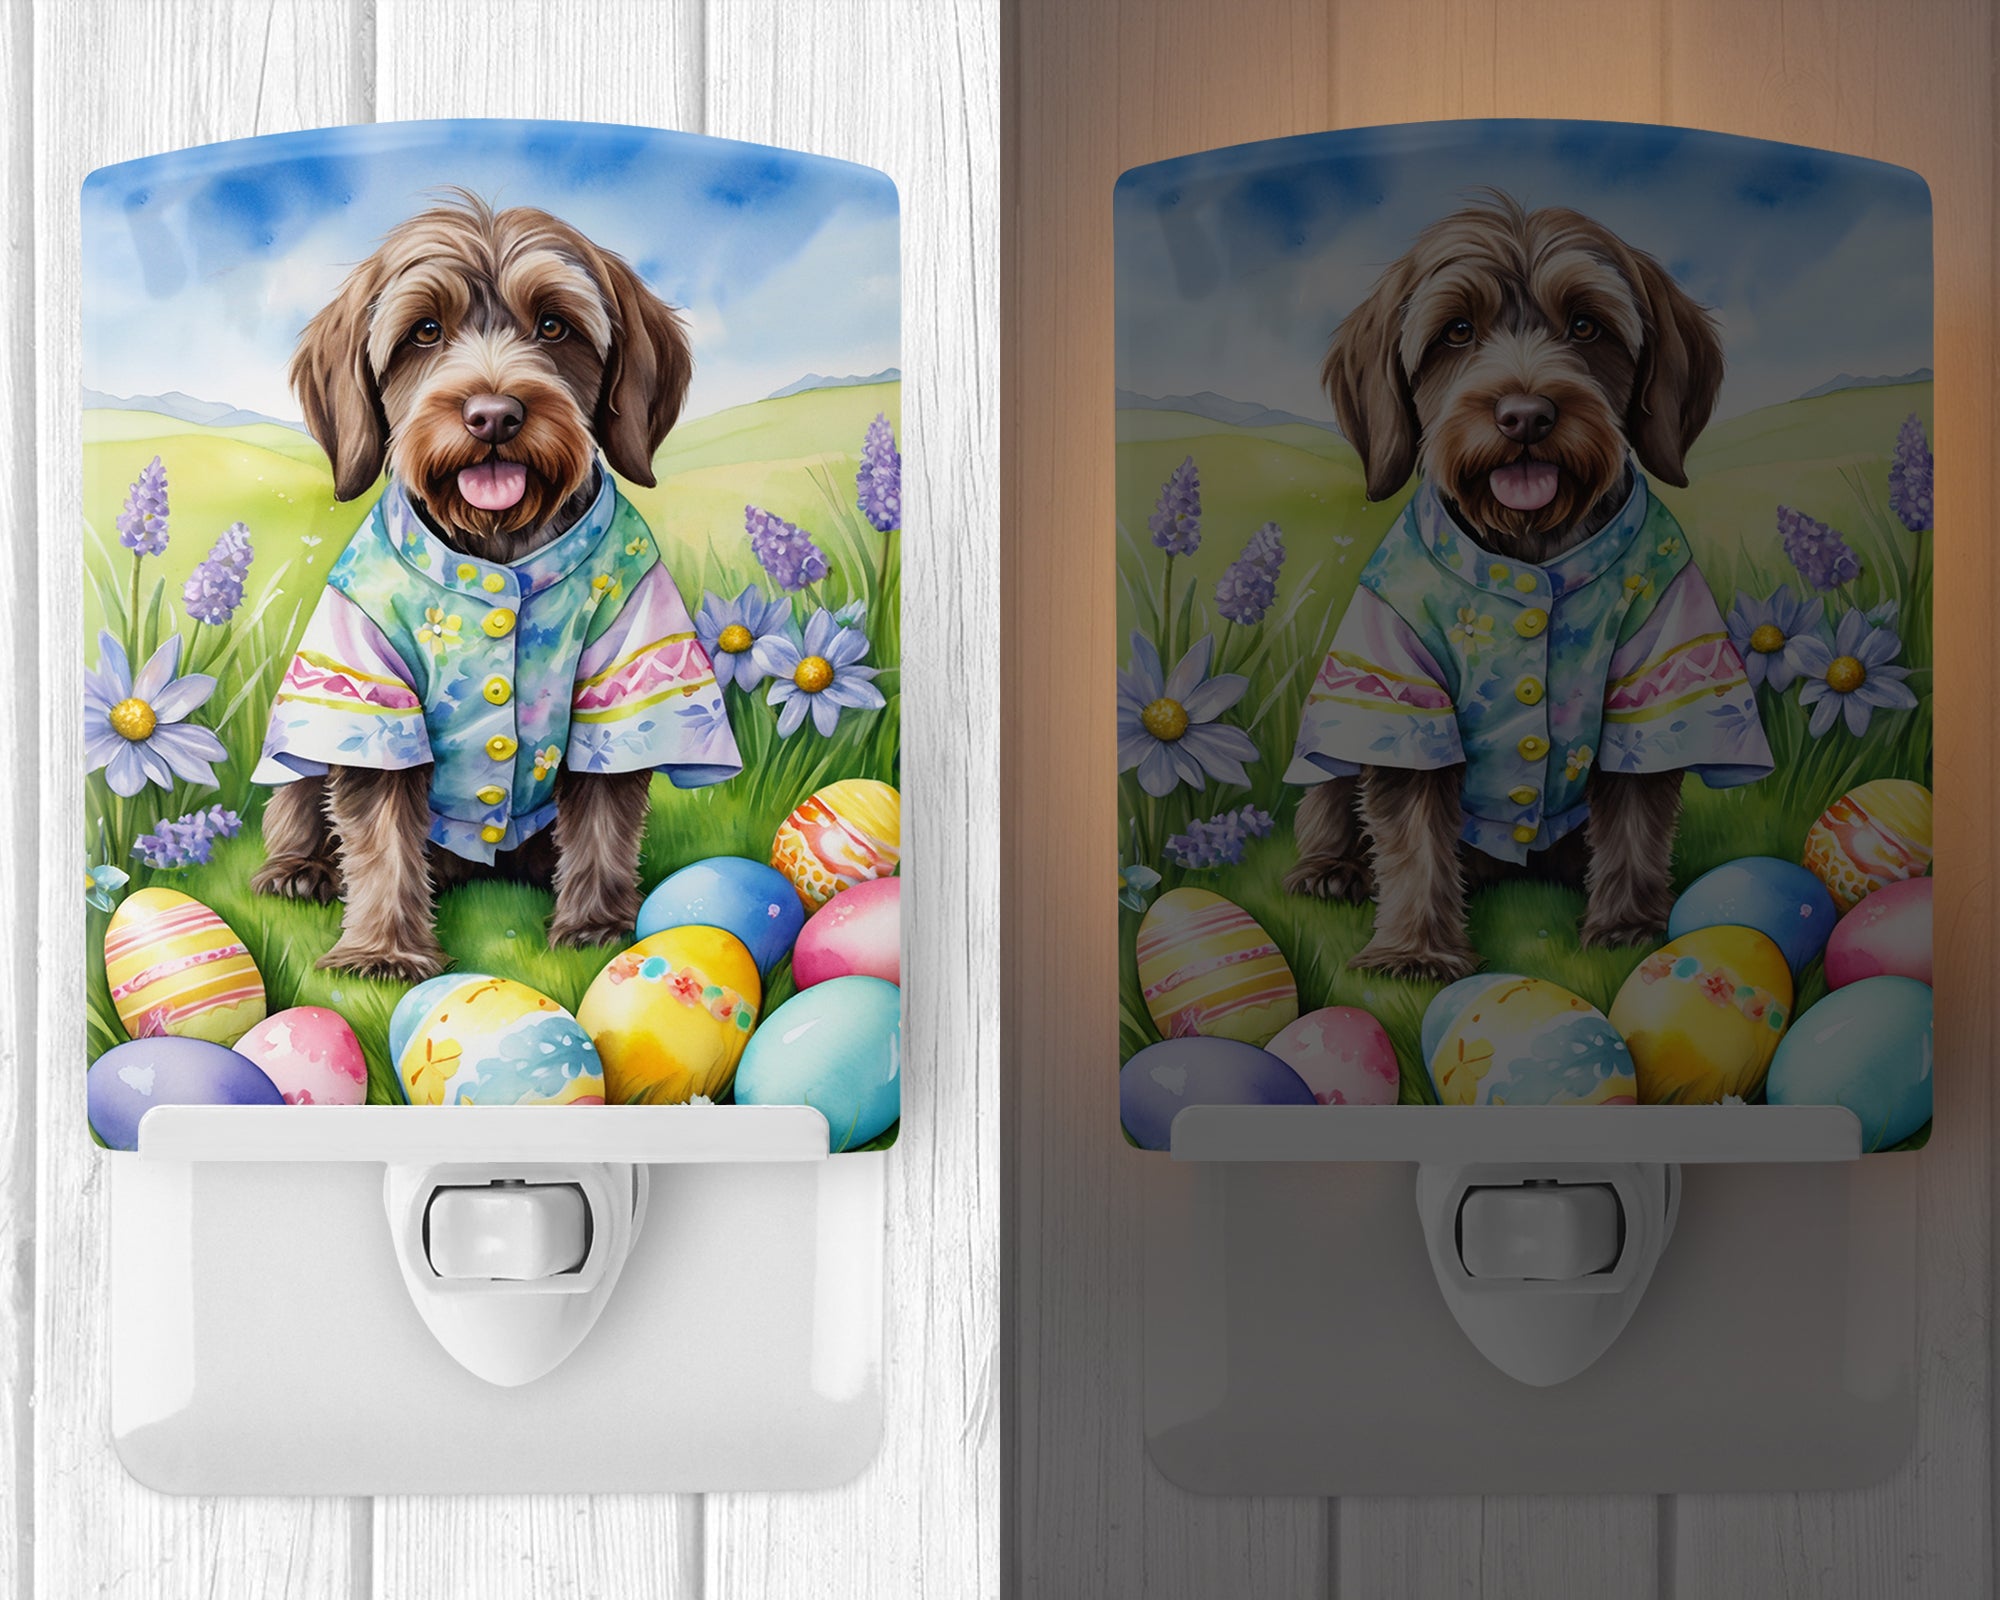 Buy this Wirehaired Pointing Griffon Easter Egg Hunt Ceramic Night Light